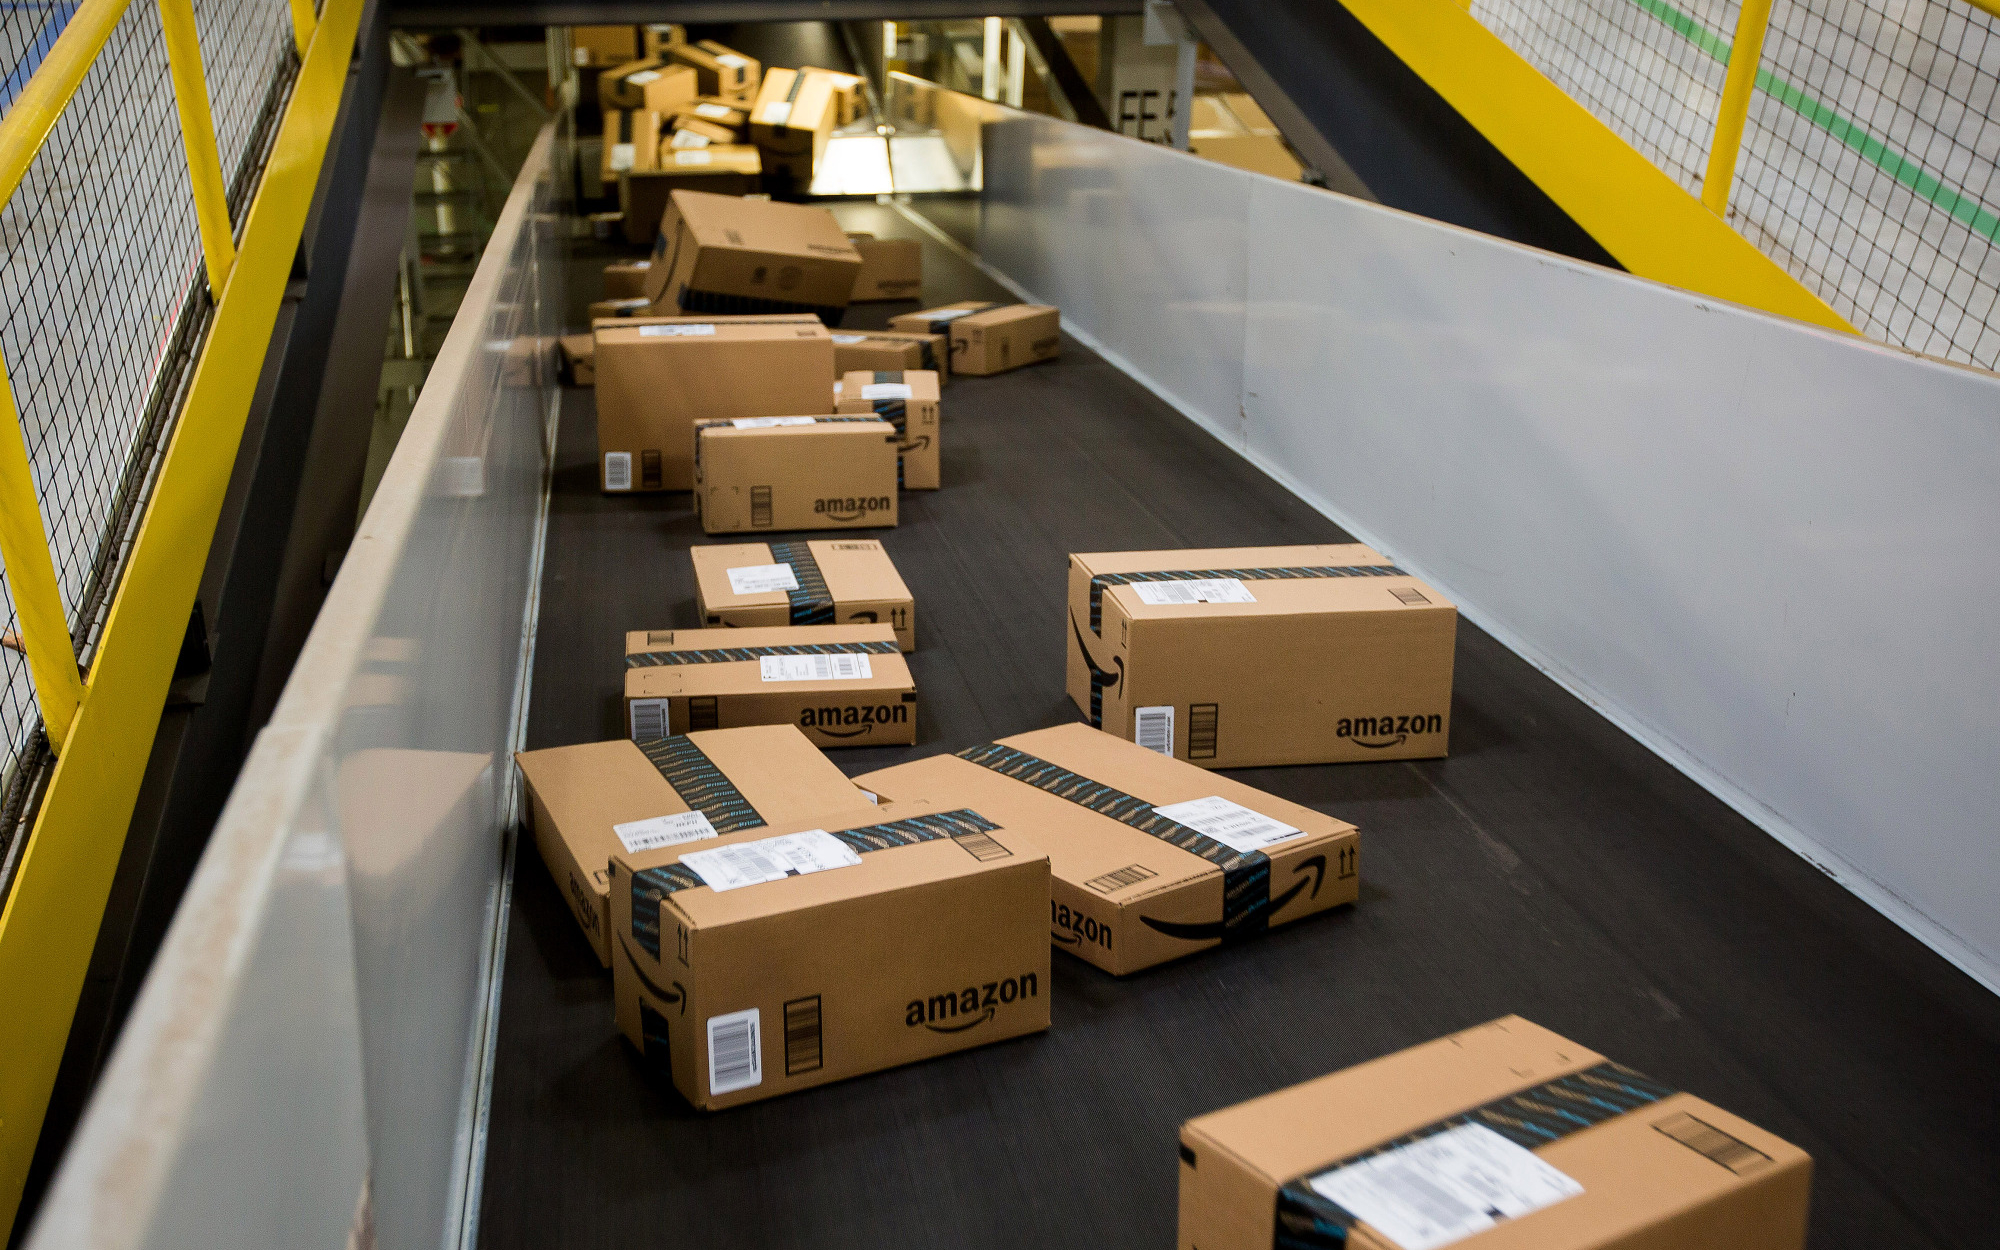 Parcels on their way to shoppers’ home amidst cyber monday sales.
Image Source: Bloomberg